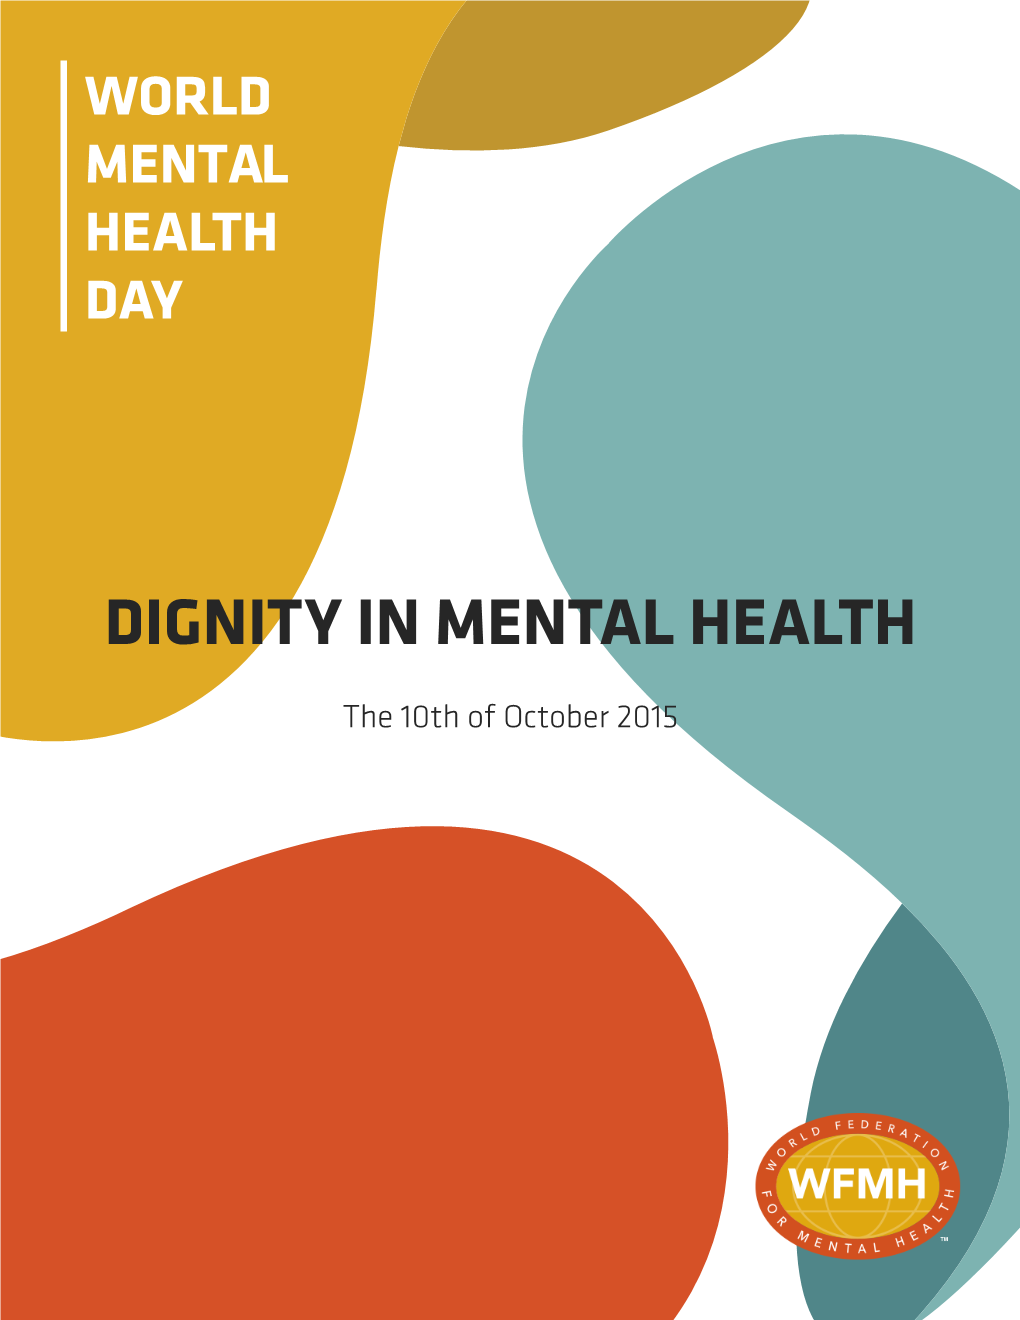 Dignity in Mental Health